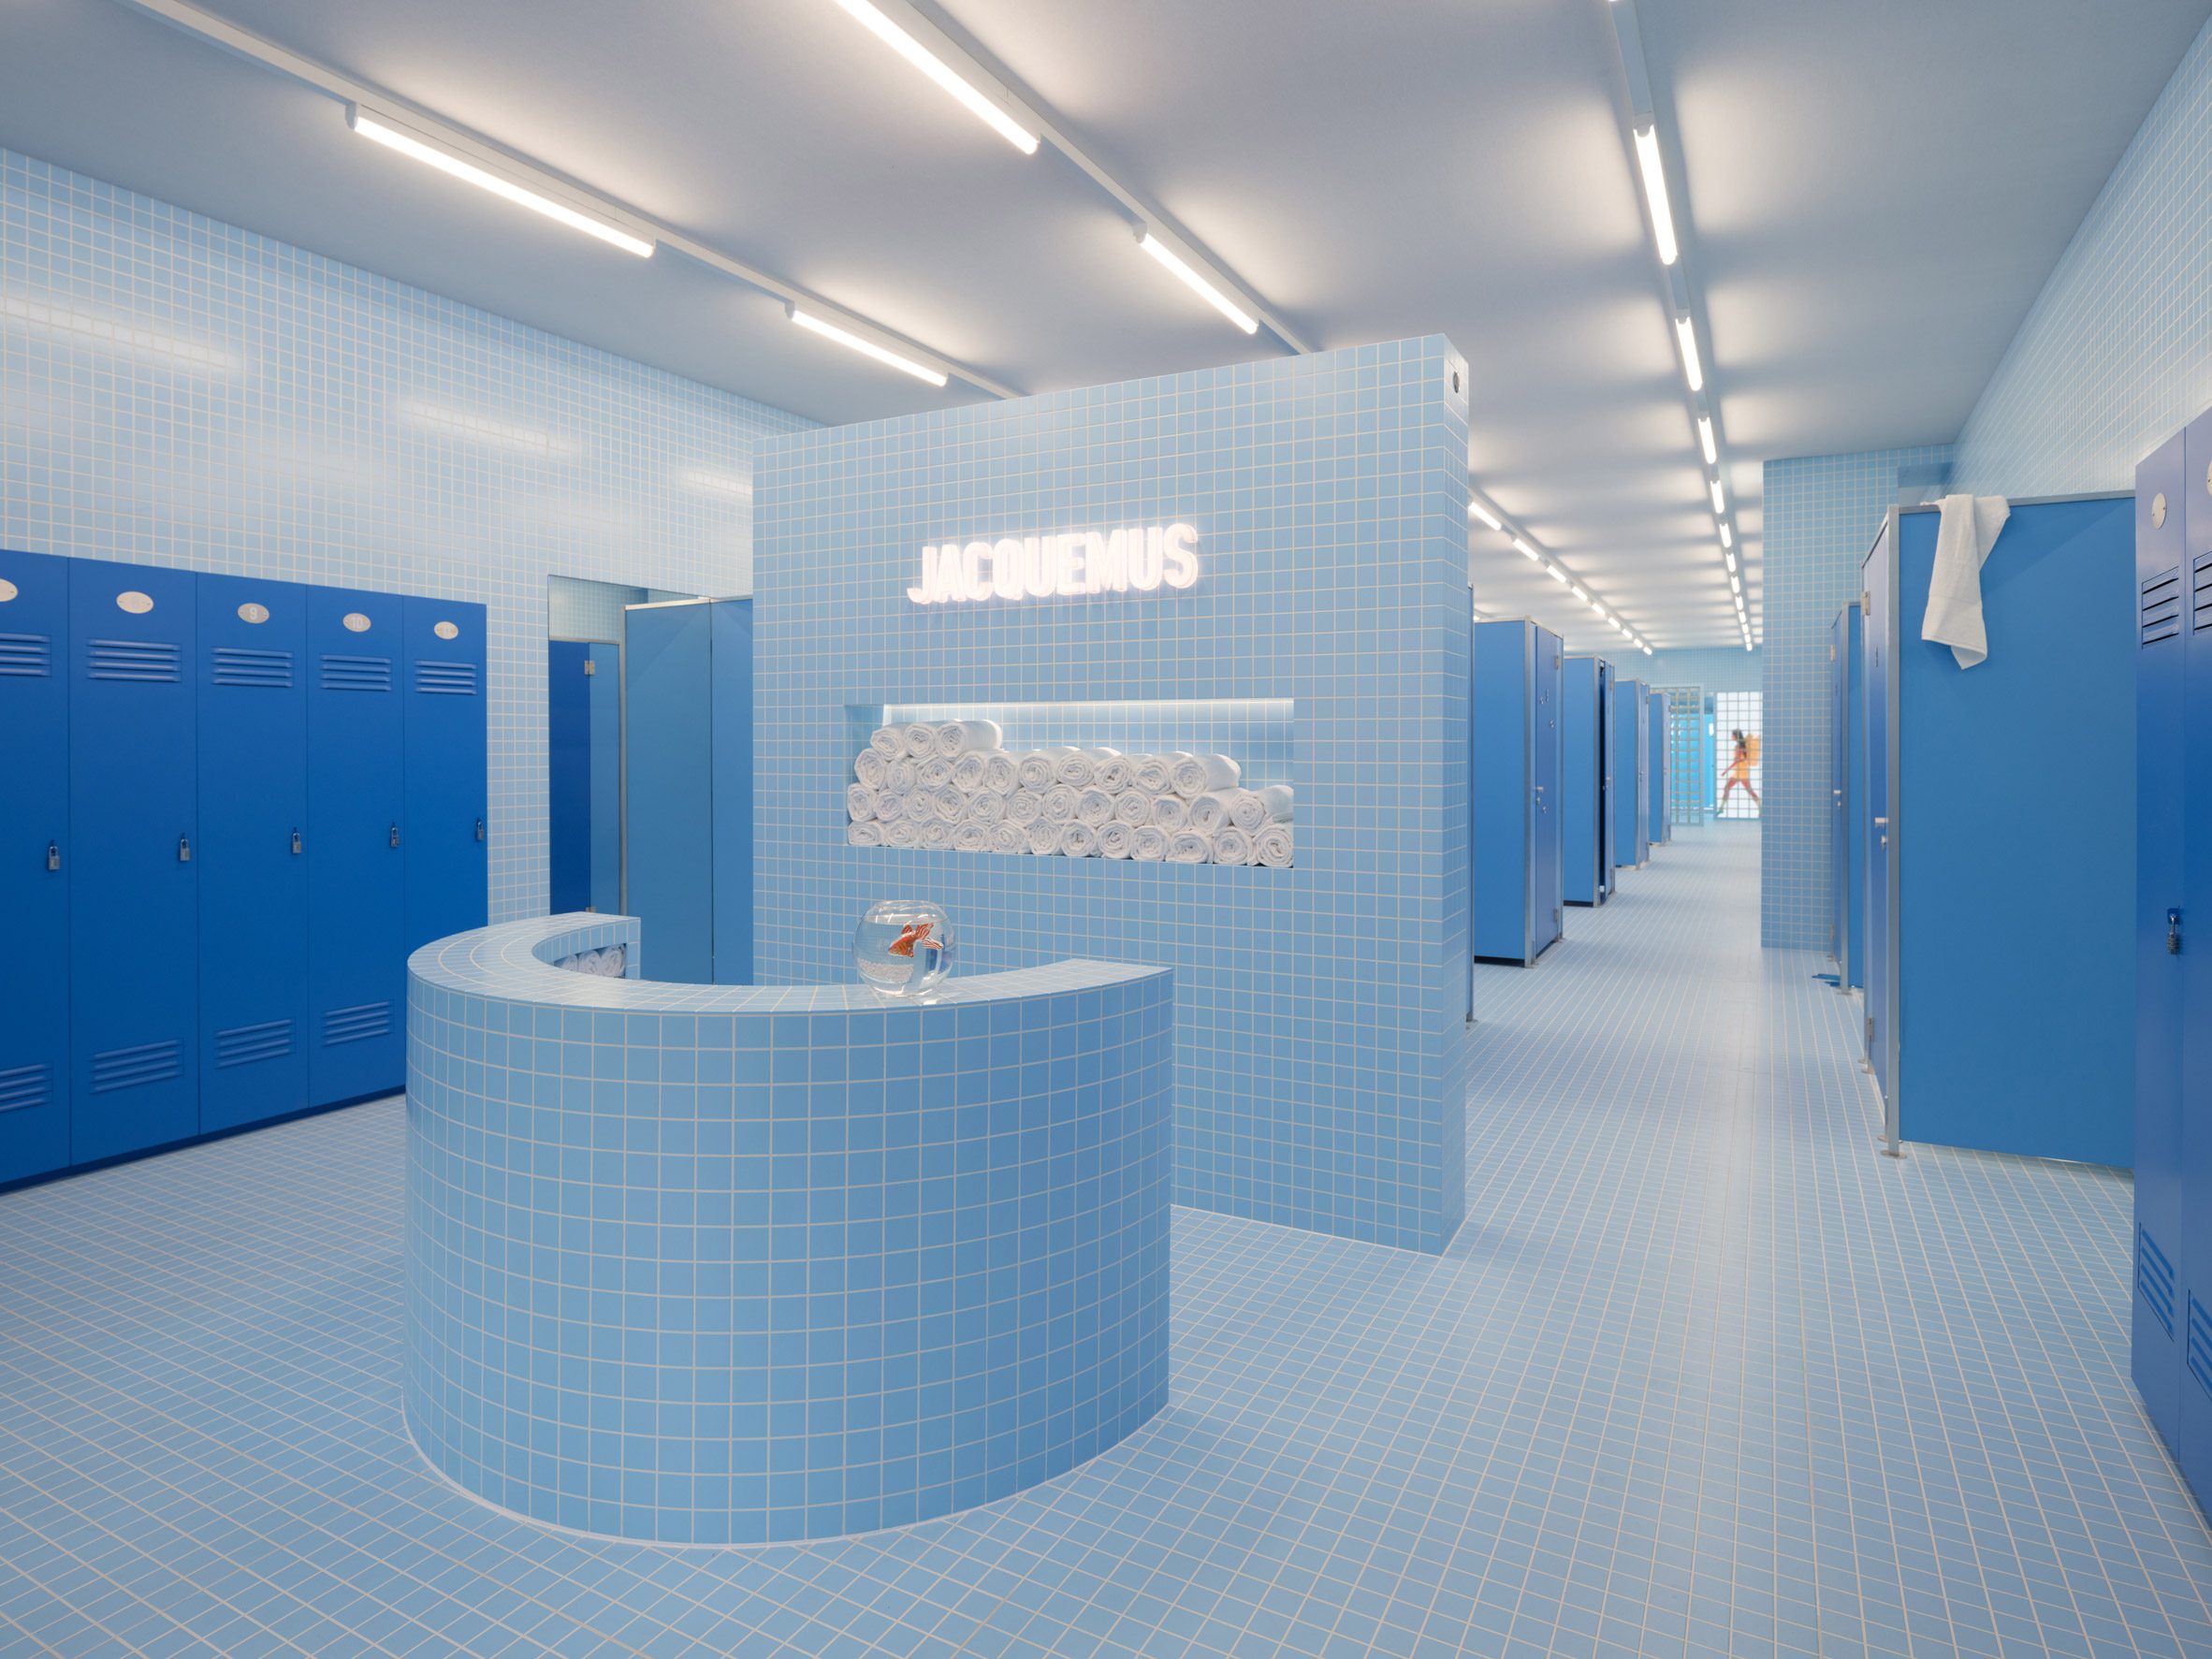 Interior image of the mock swimming pool changing rooms at Le Bleu 